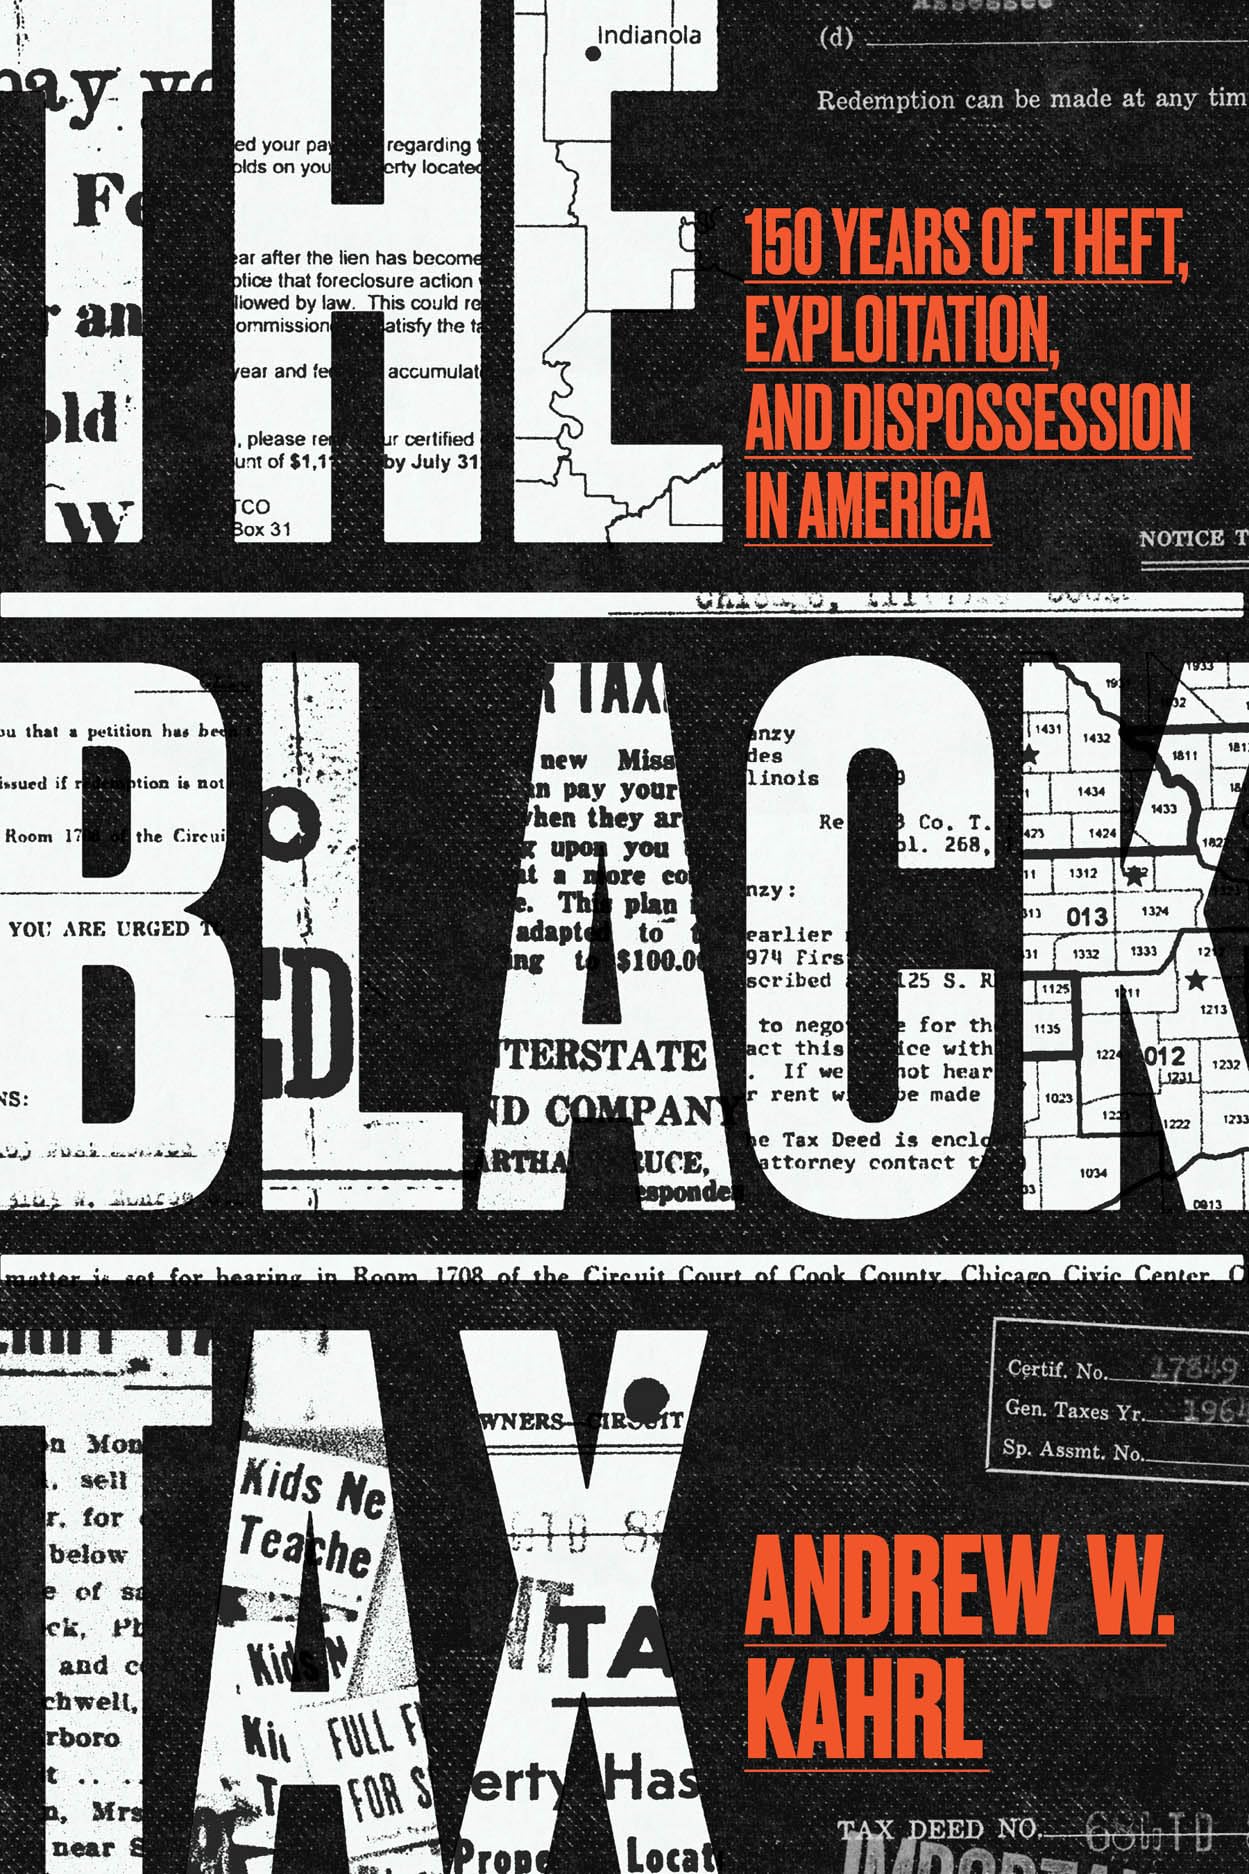 The Black Tax: 150 Years of Theft, Exploitation, and Dispossession in America (Hardcover)